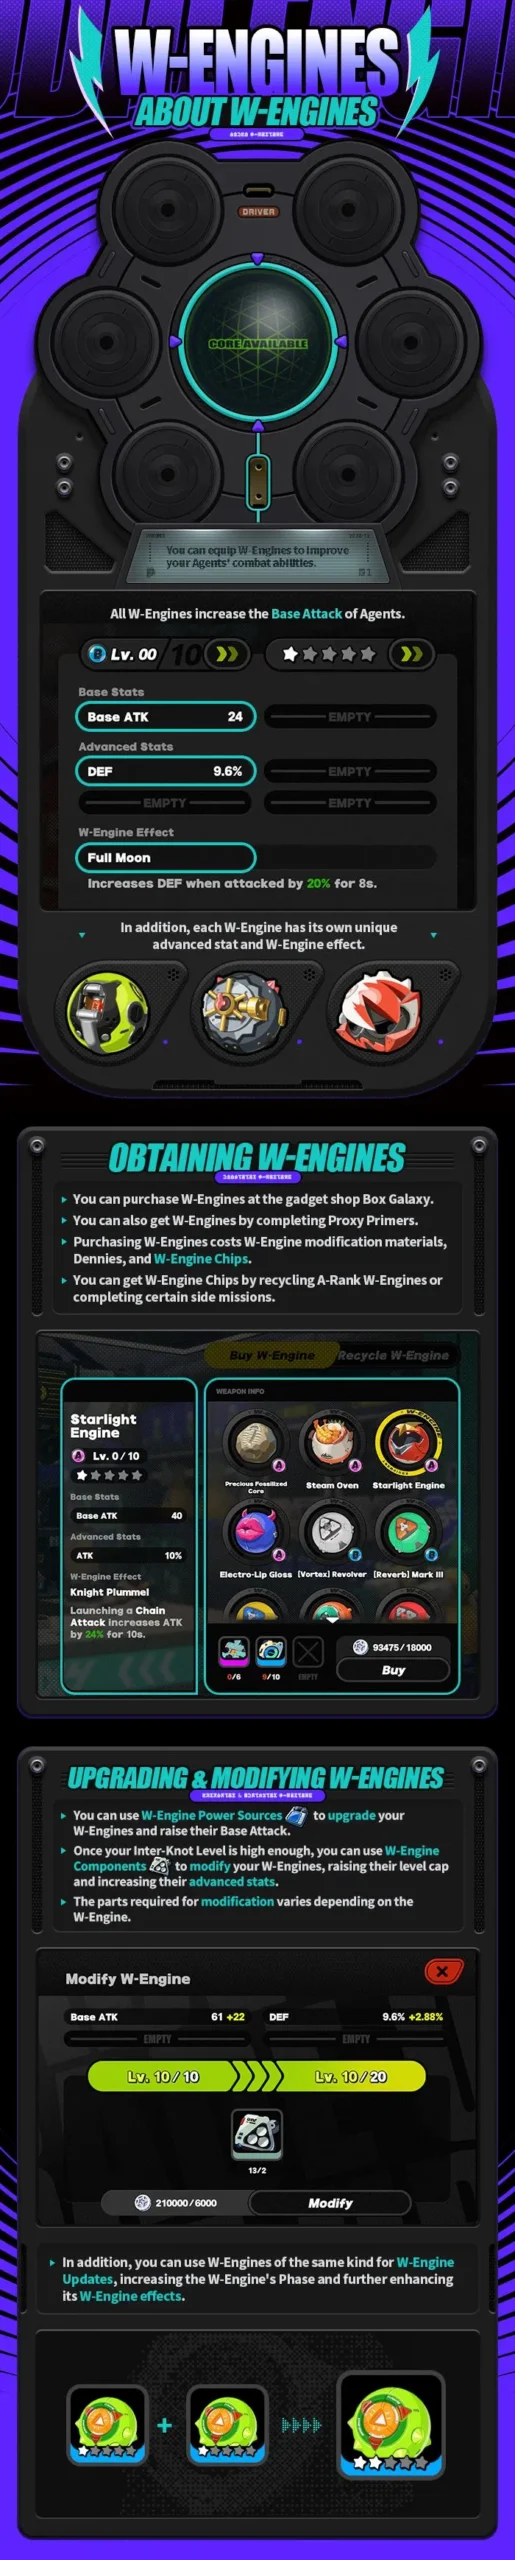 W-Engine guide